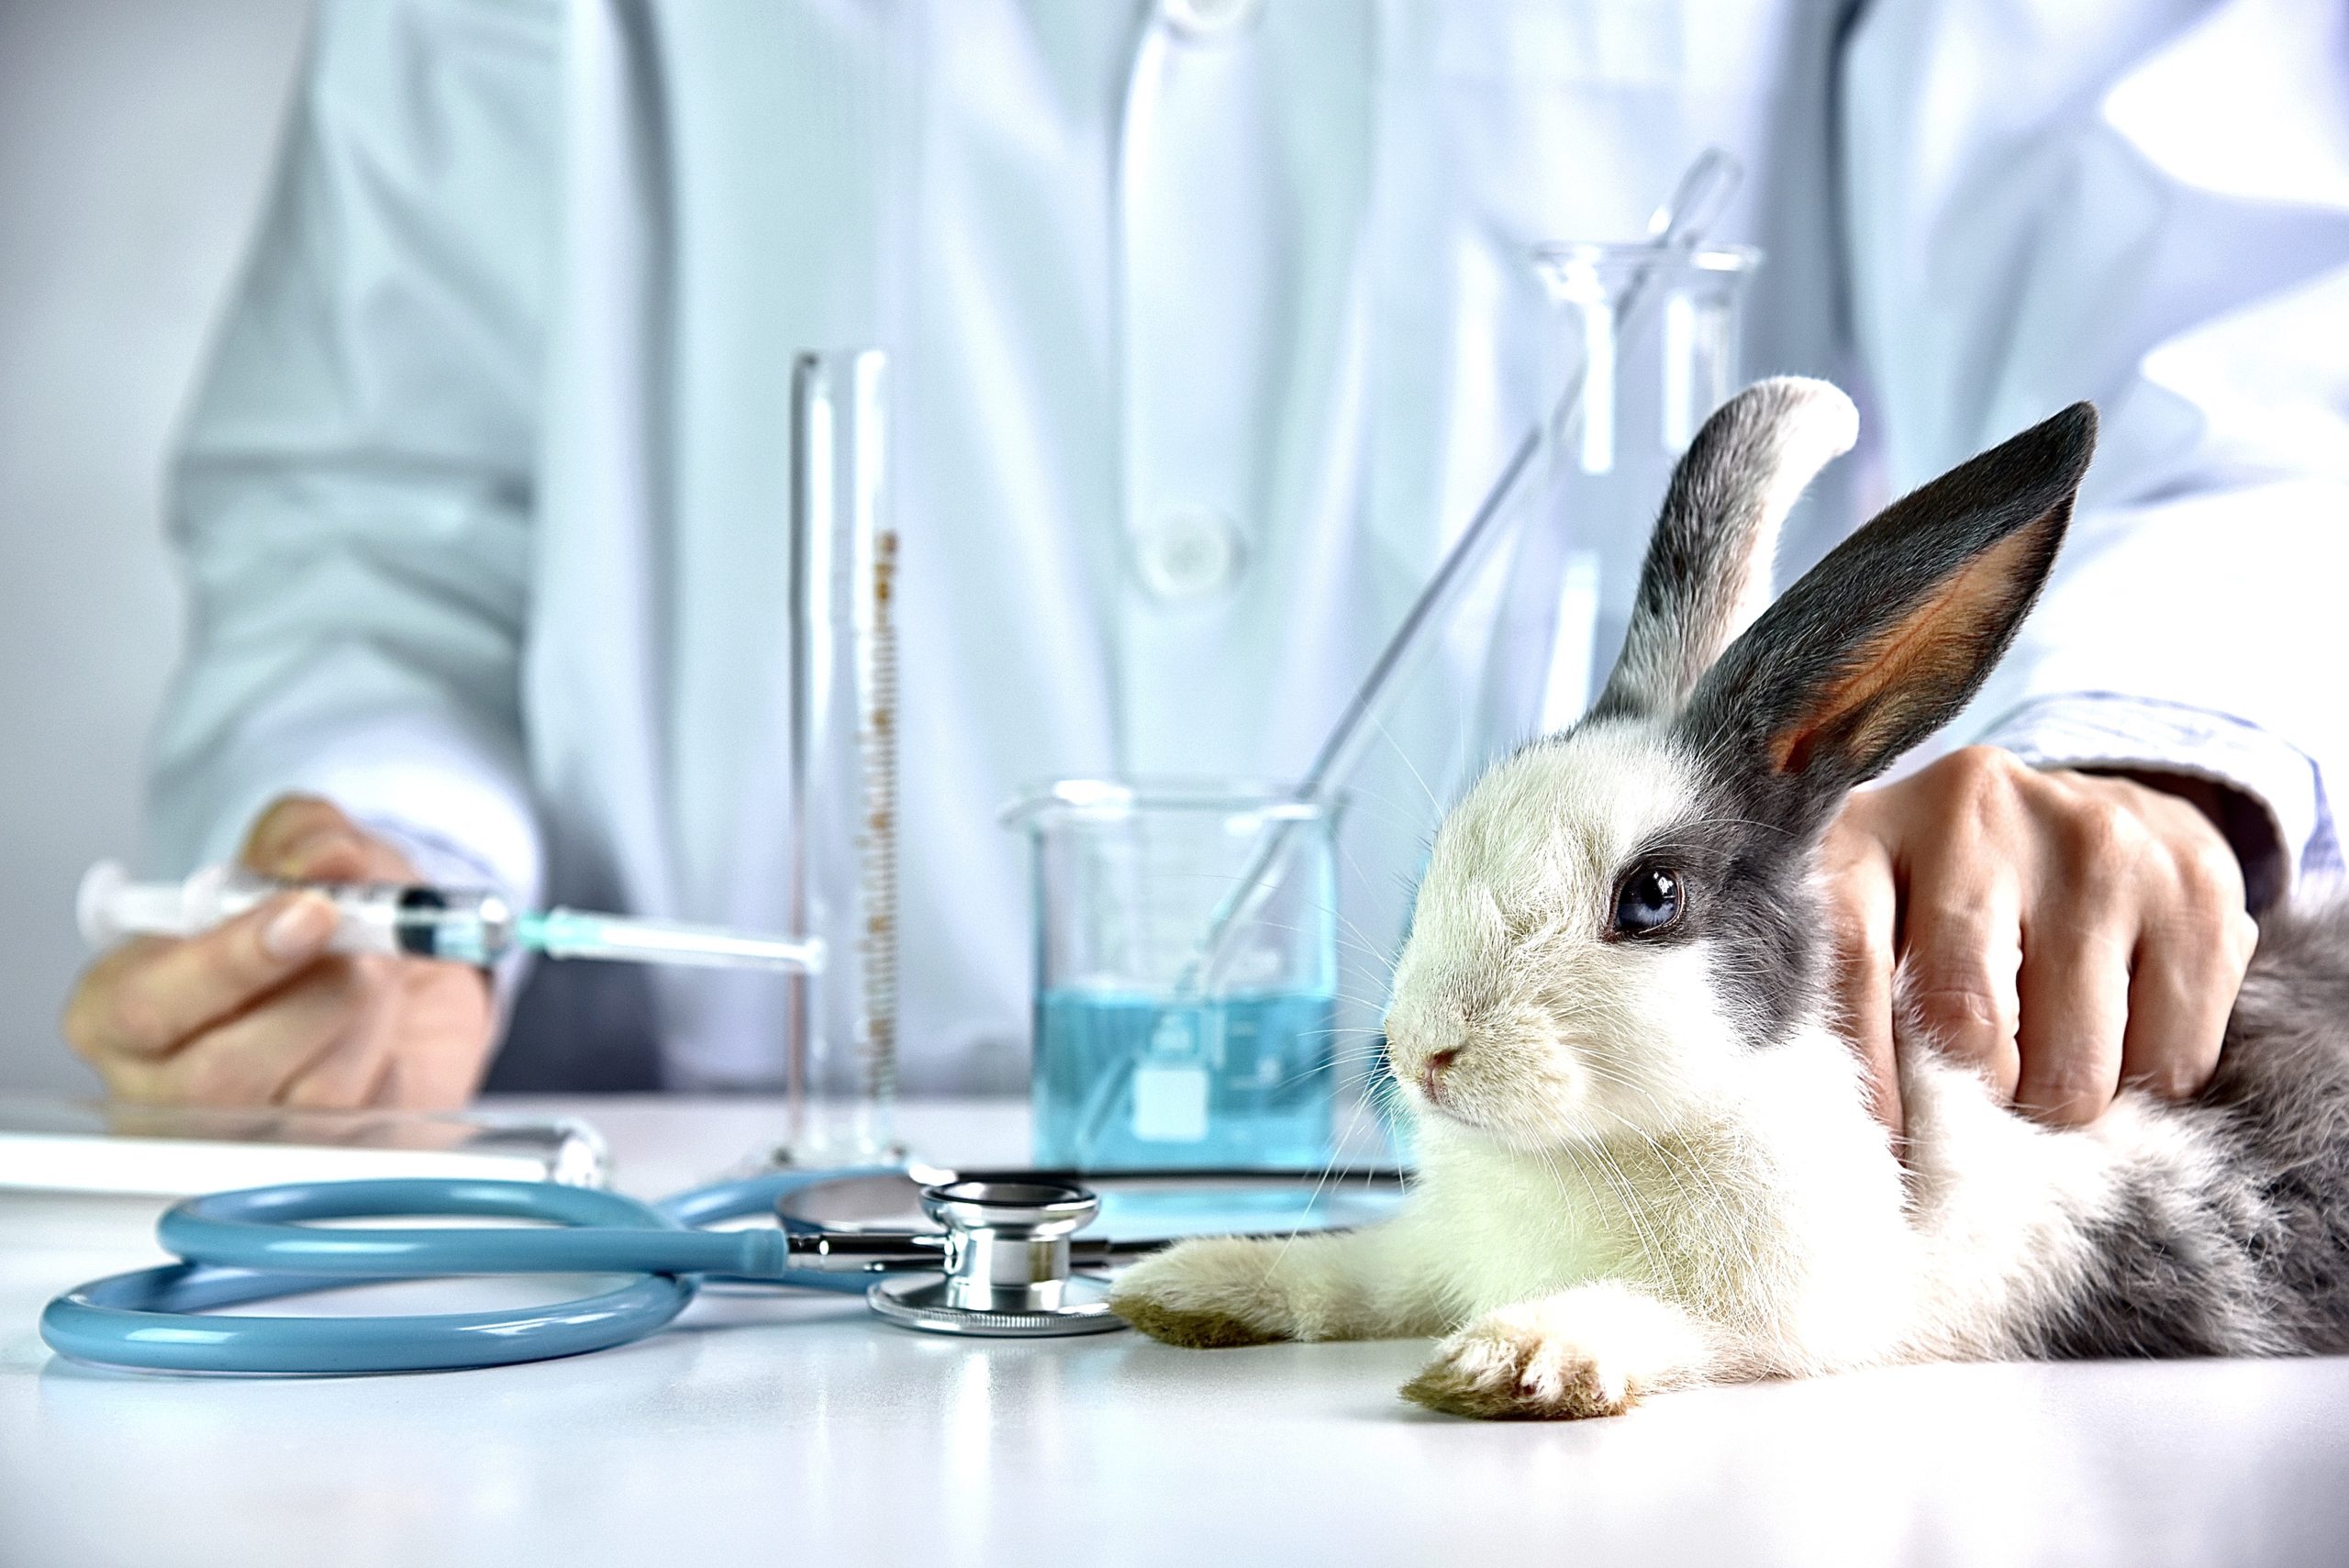 researches on animal testing